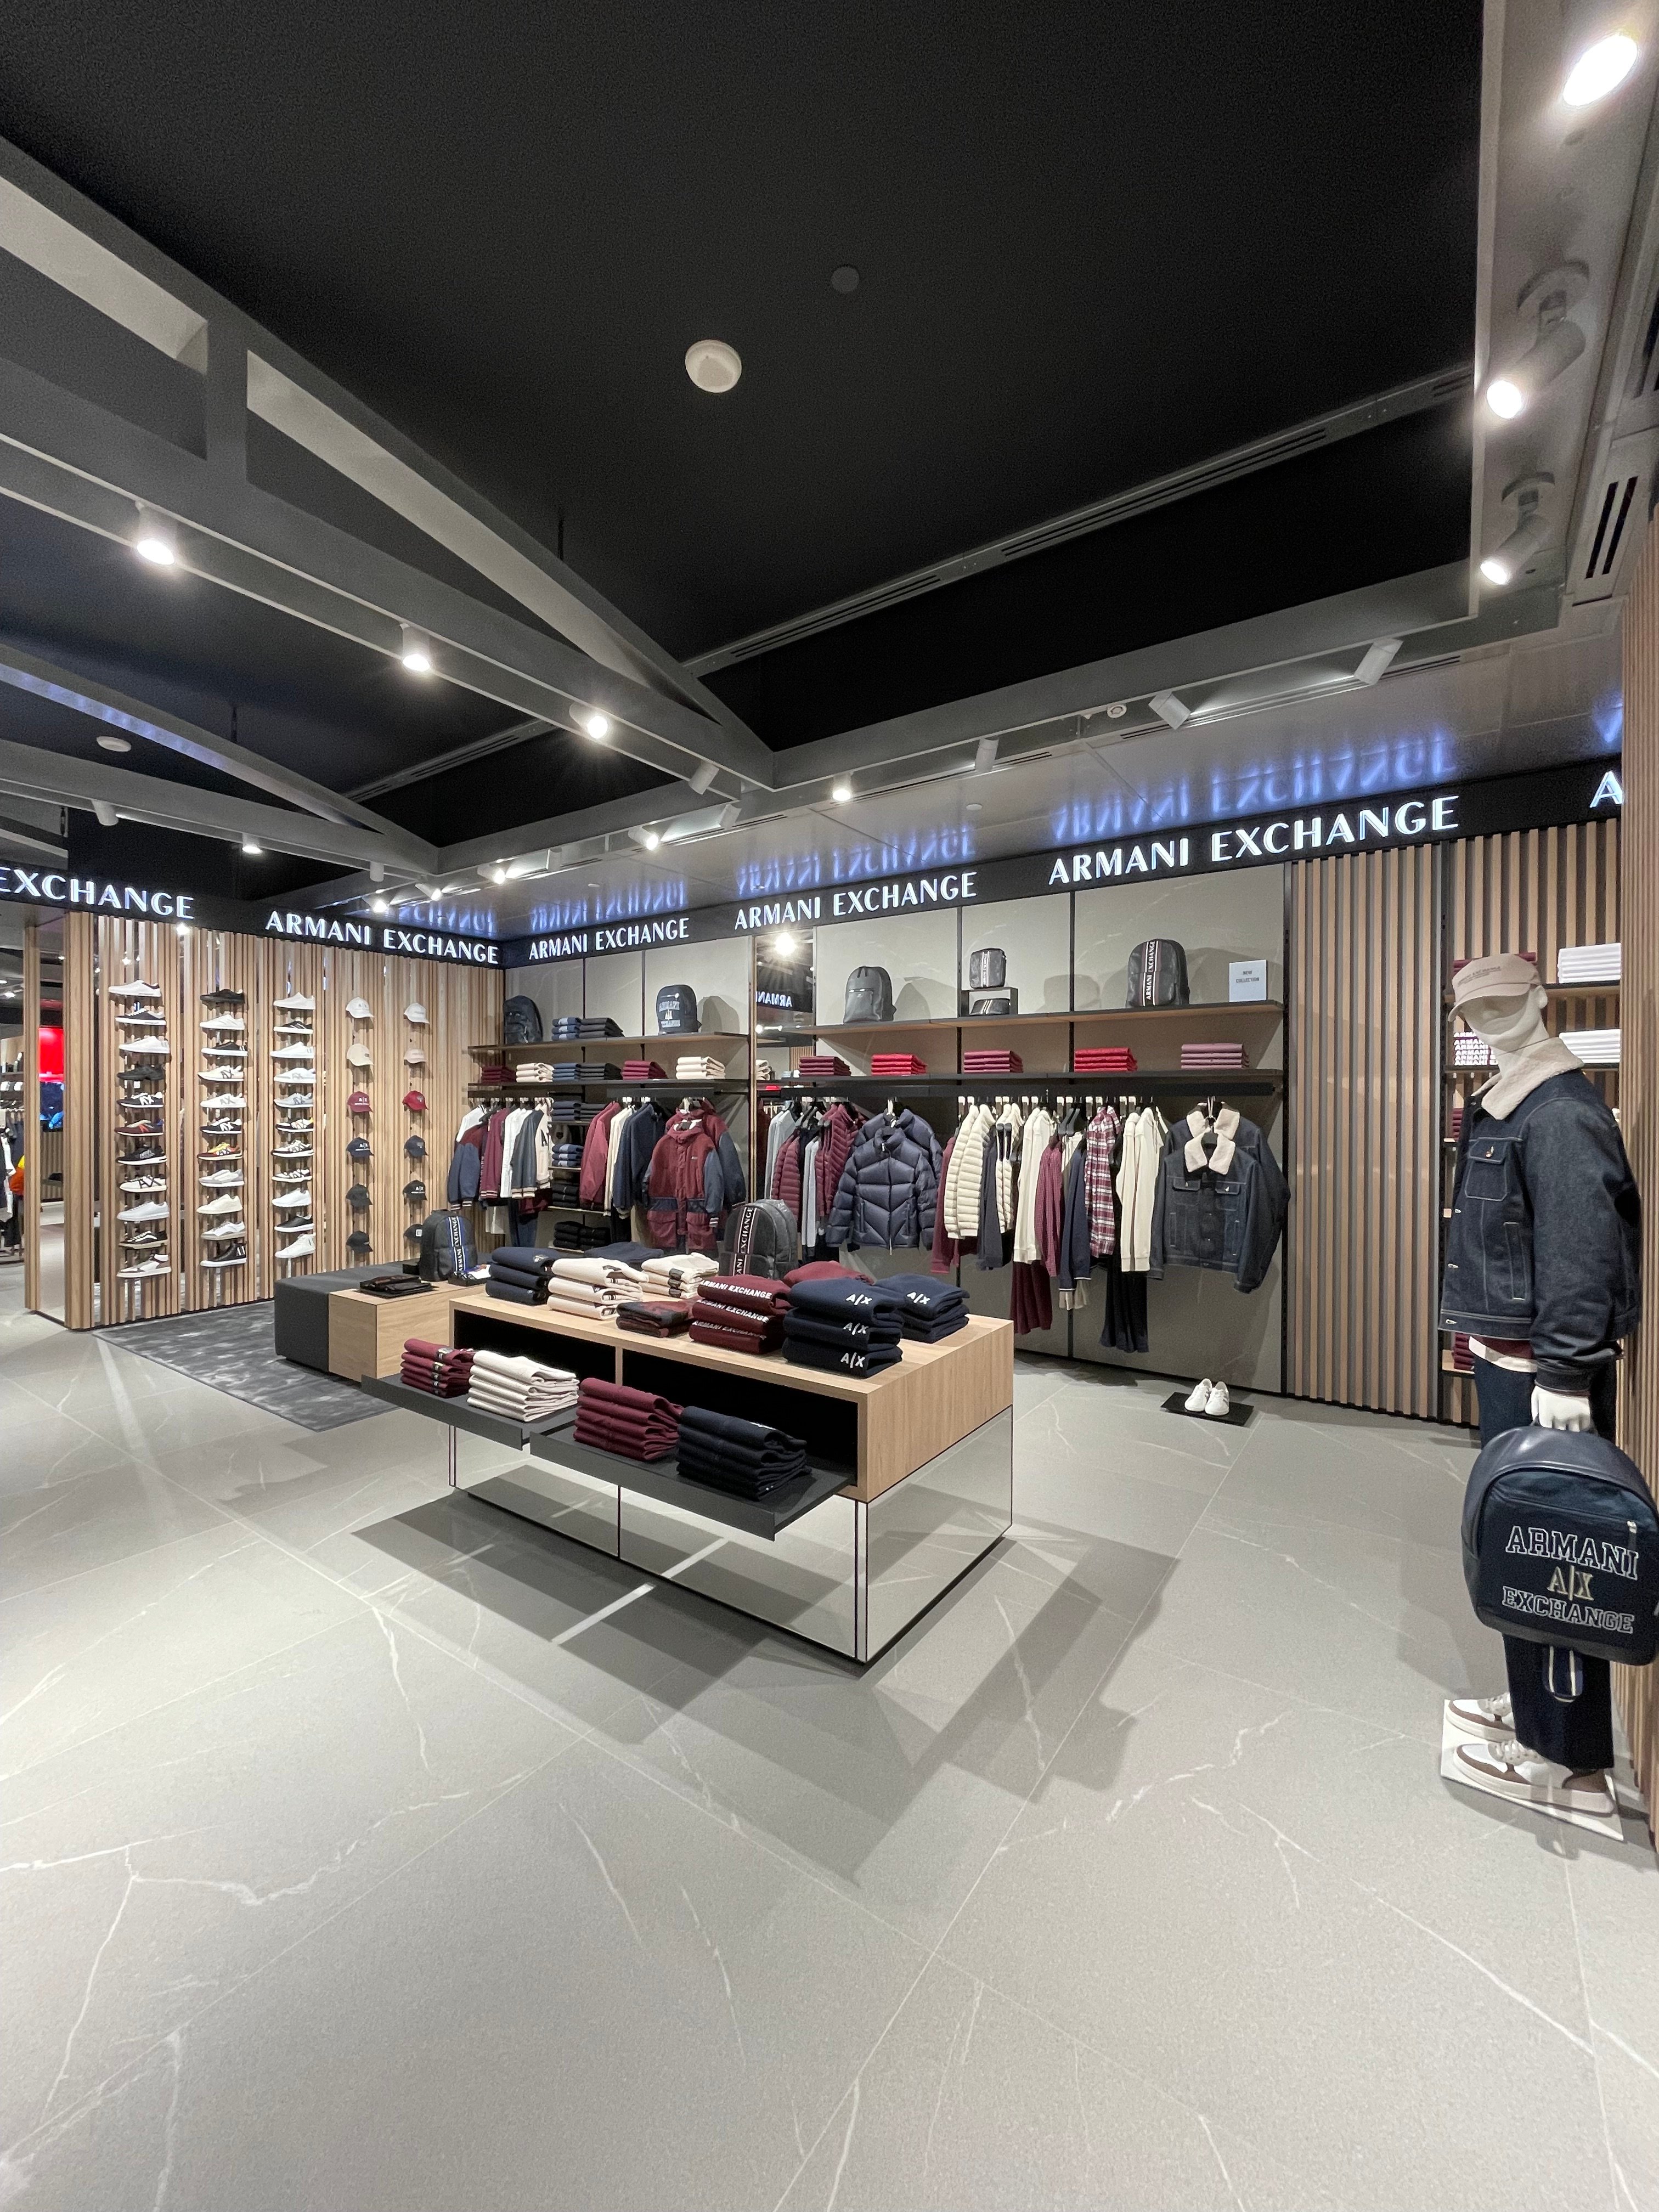 Armani Exchange Outlet Stores Across All Simon Shopping Centers